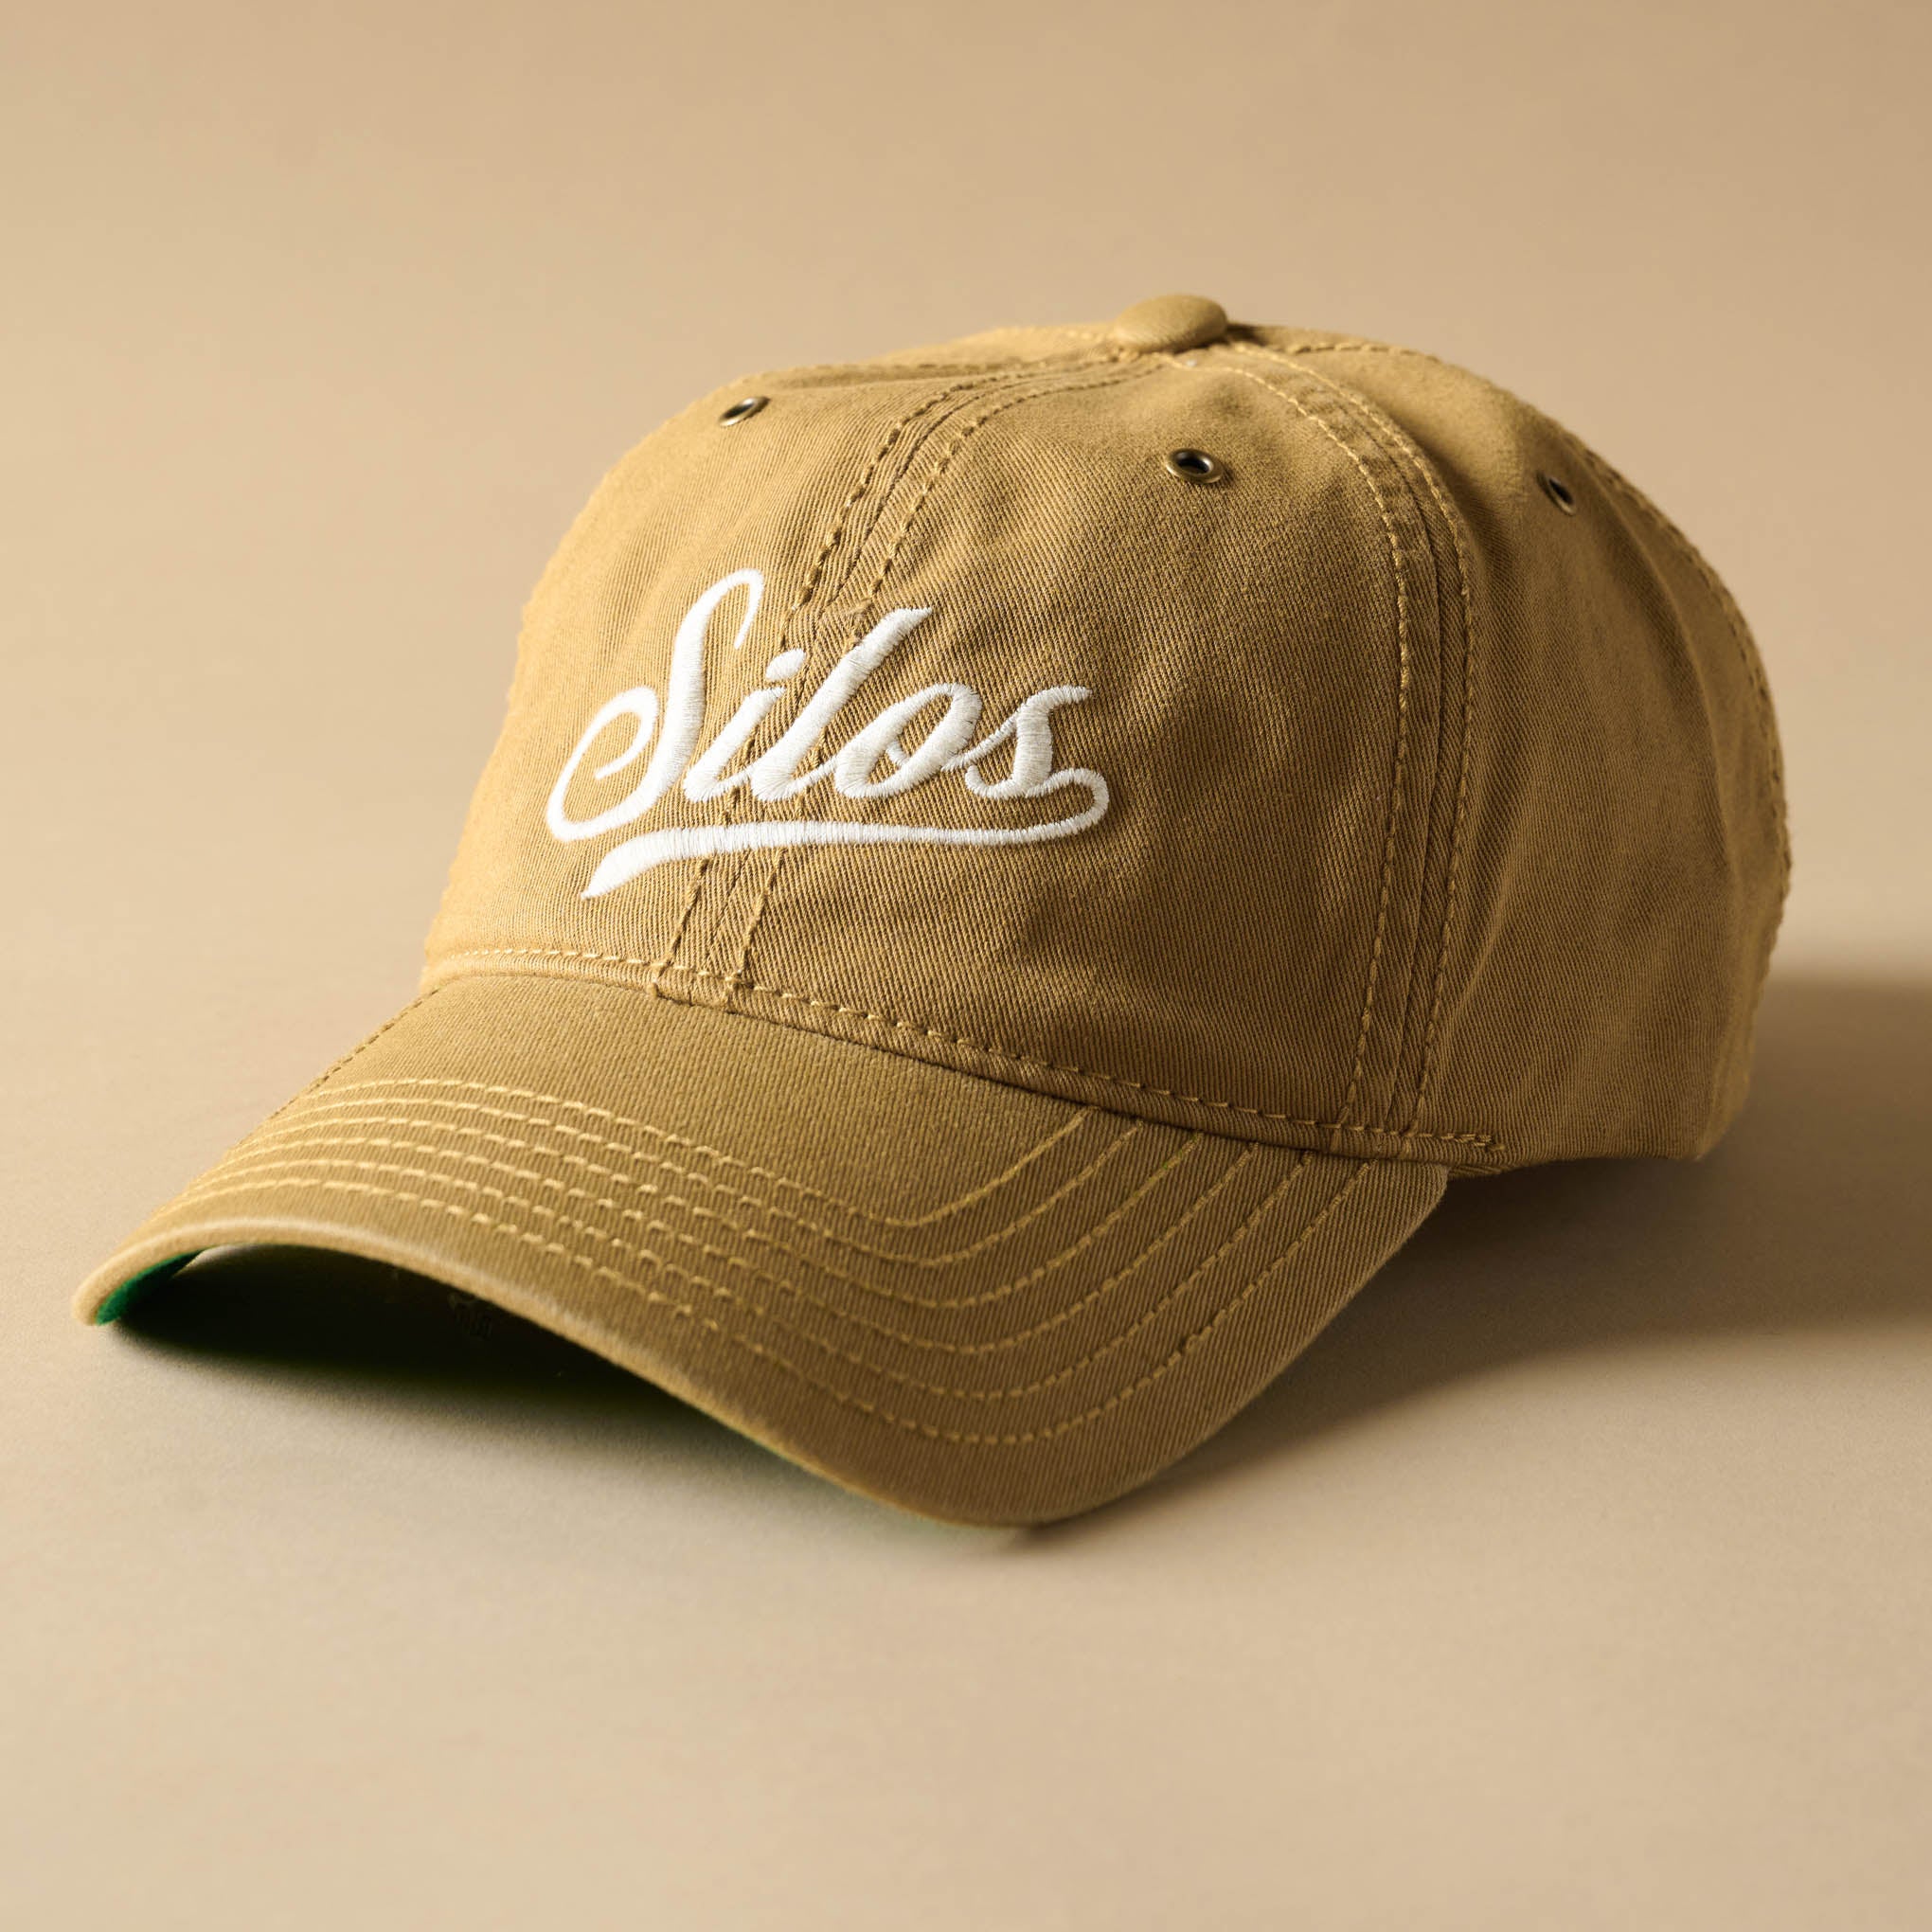 Silos Distressed Baseball Hat - front of hat reads silos in script $34.00